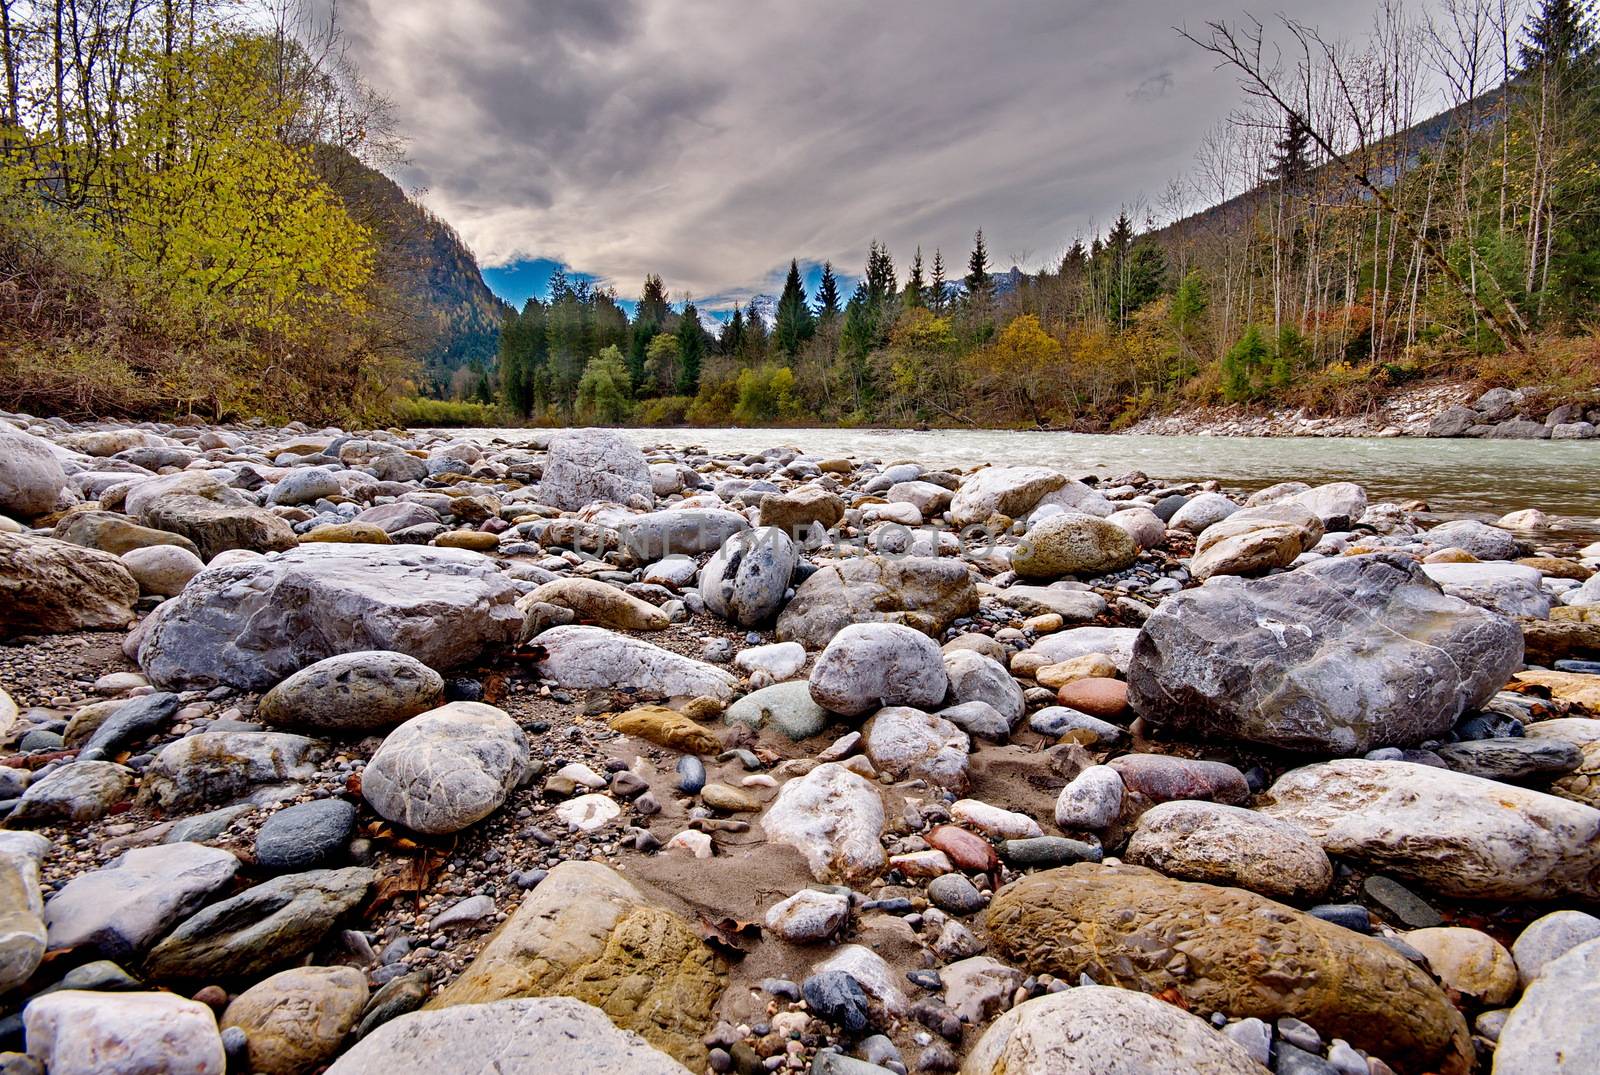 Rocks in the flowing river at the mountains